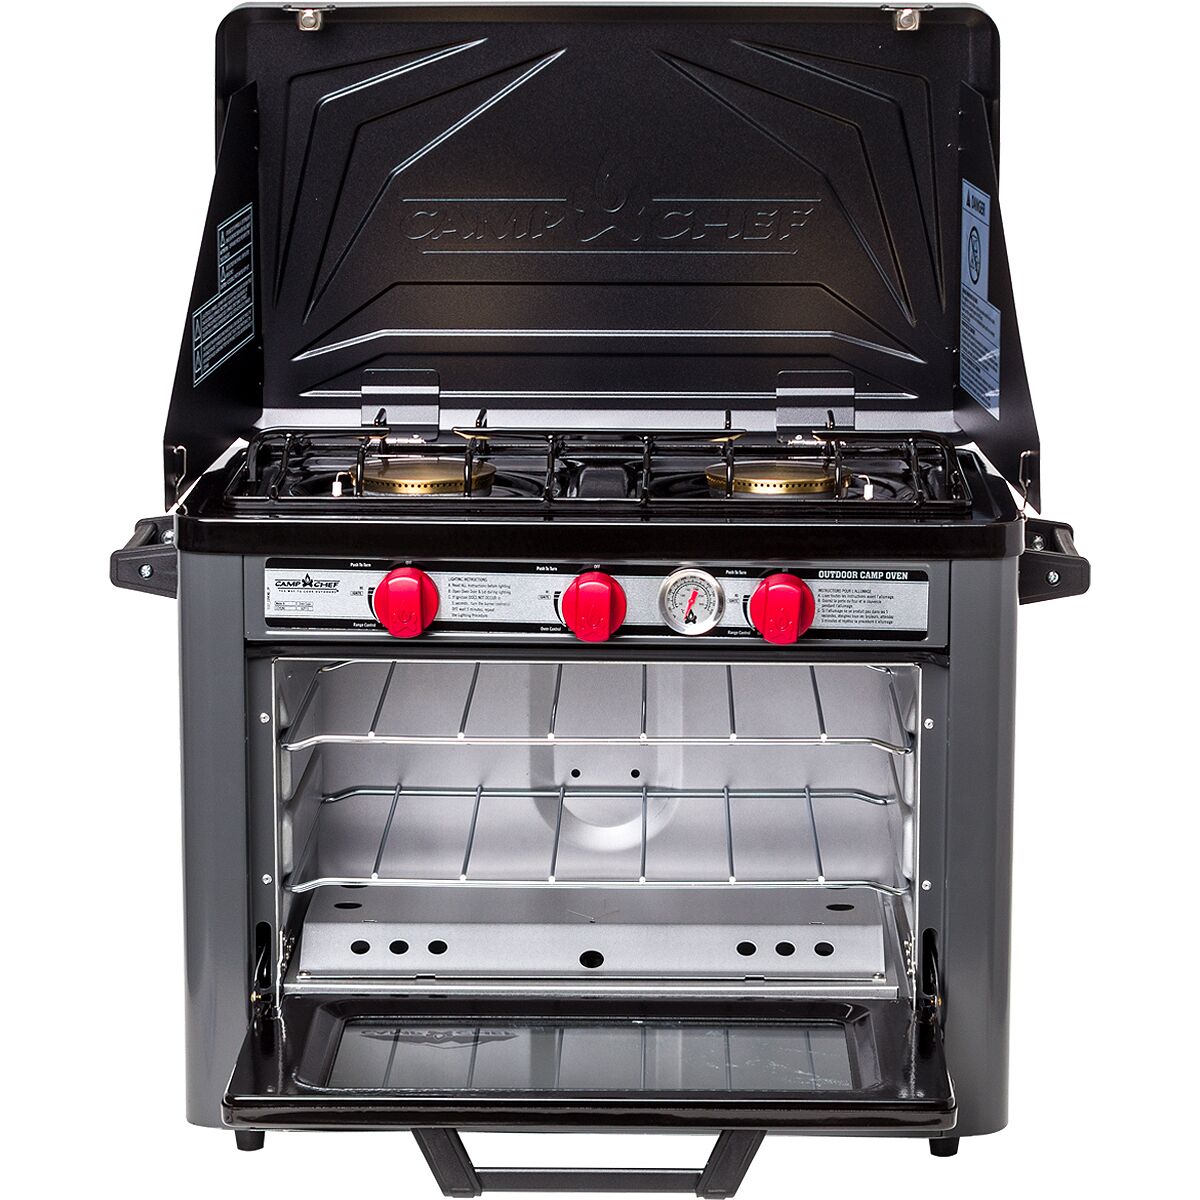 Camp Chef Deluxe Outdoor Camp Oven